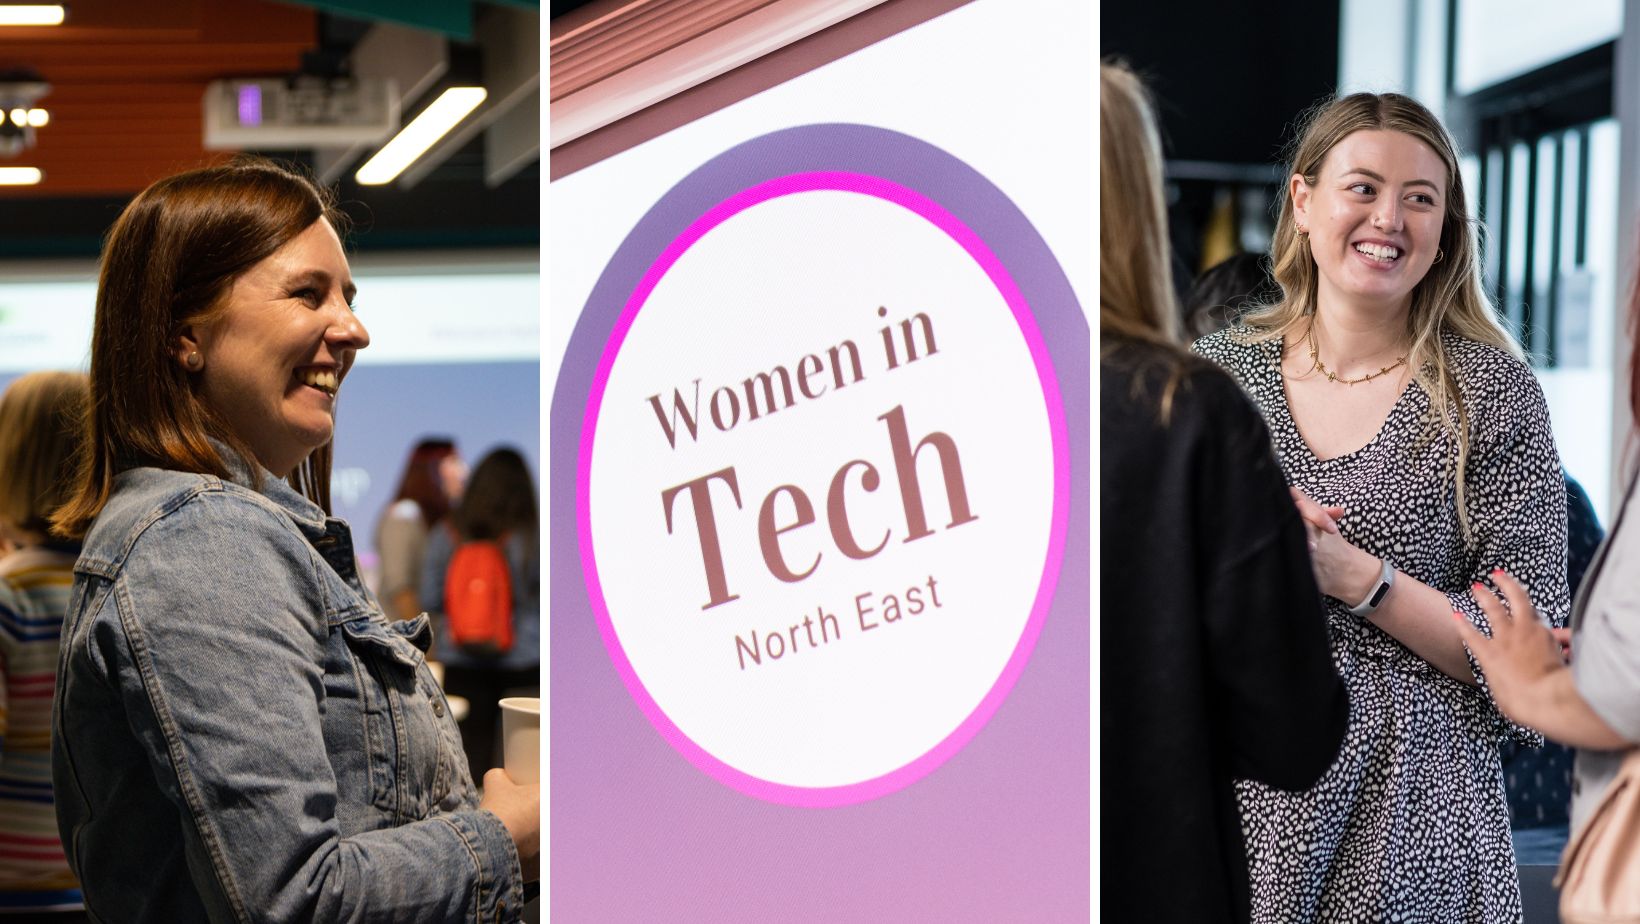 A lady with dark hair smiling, a pink women in tech logo, a blonde lady smiling 